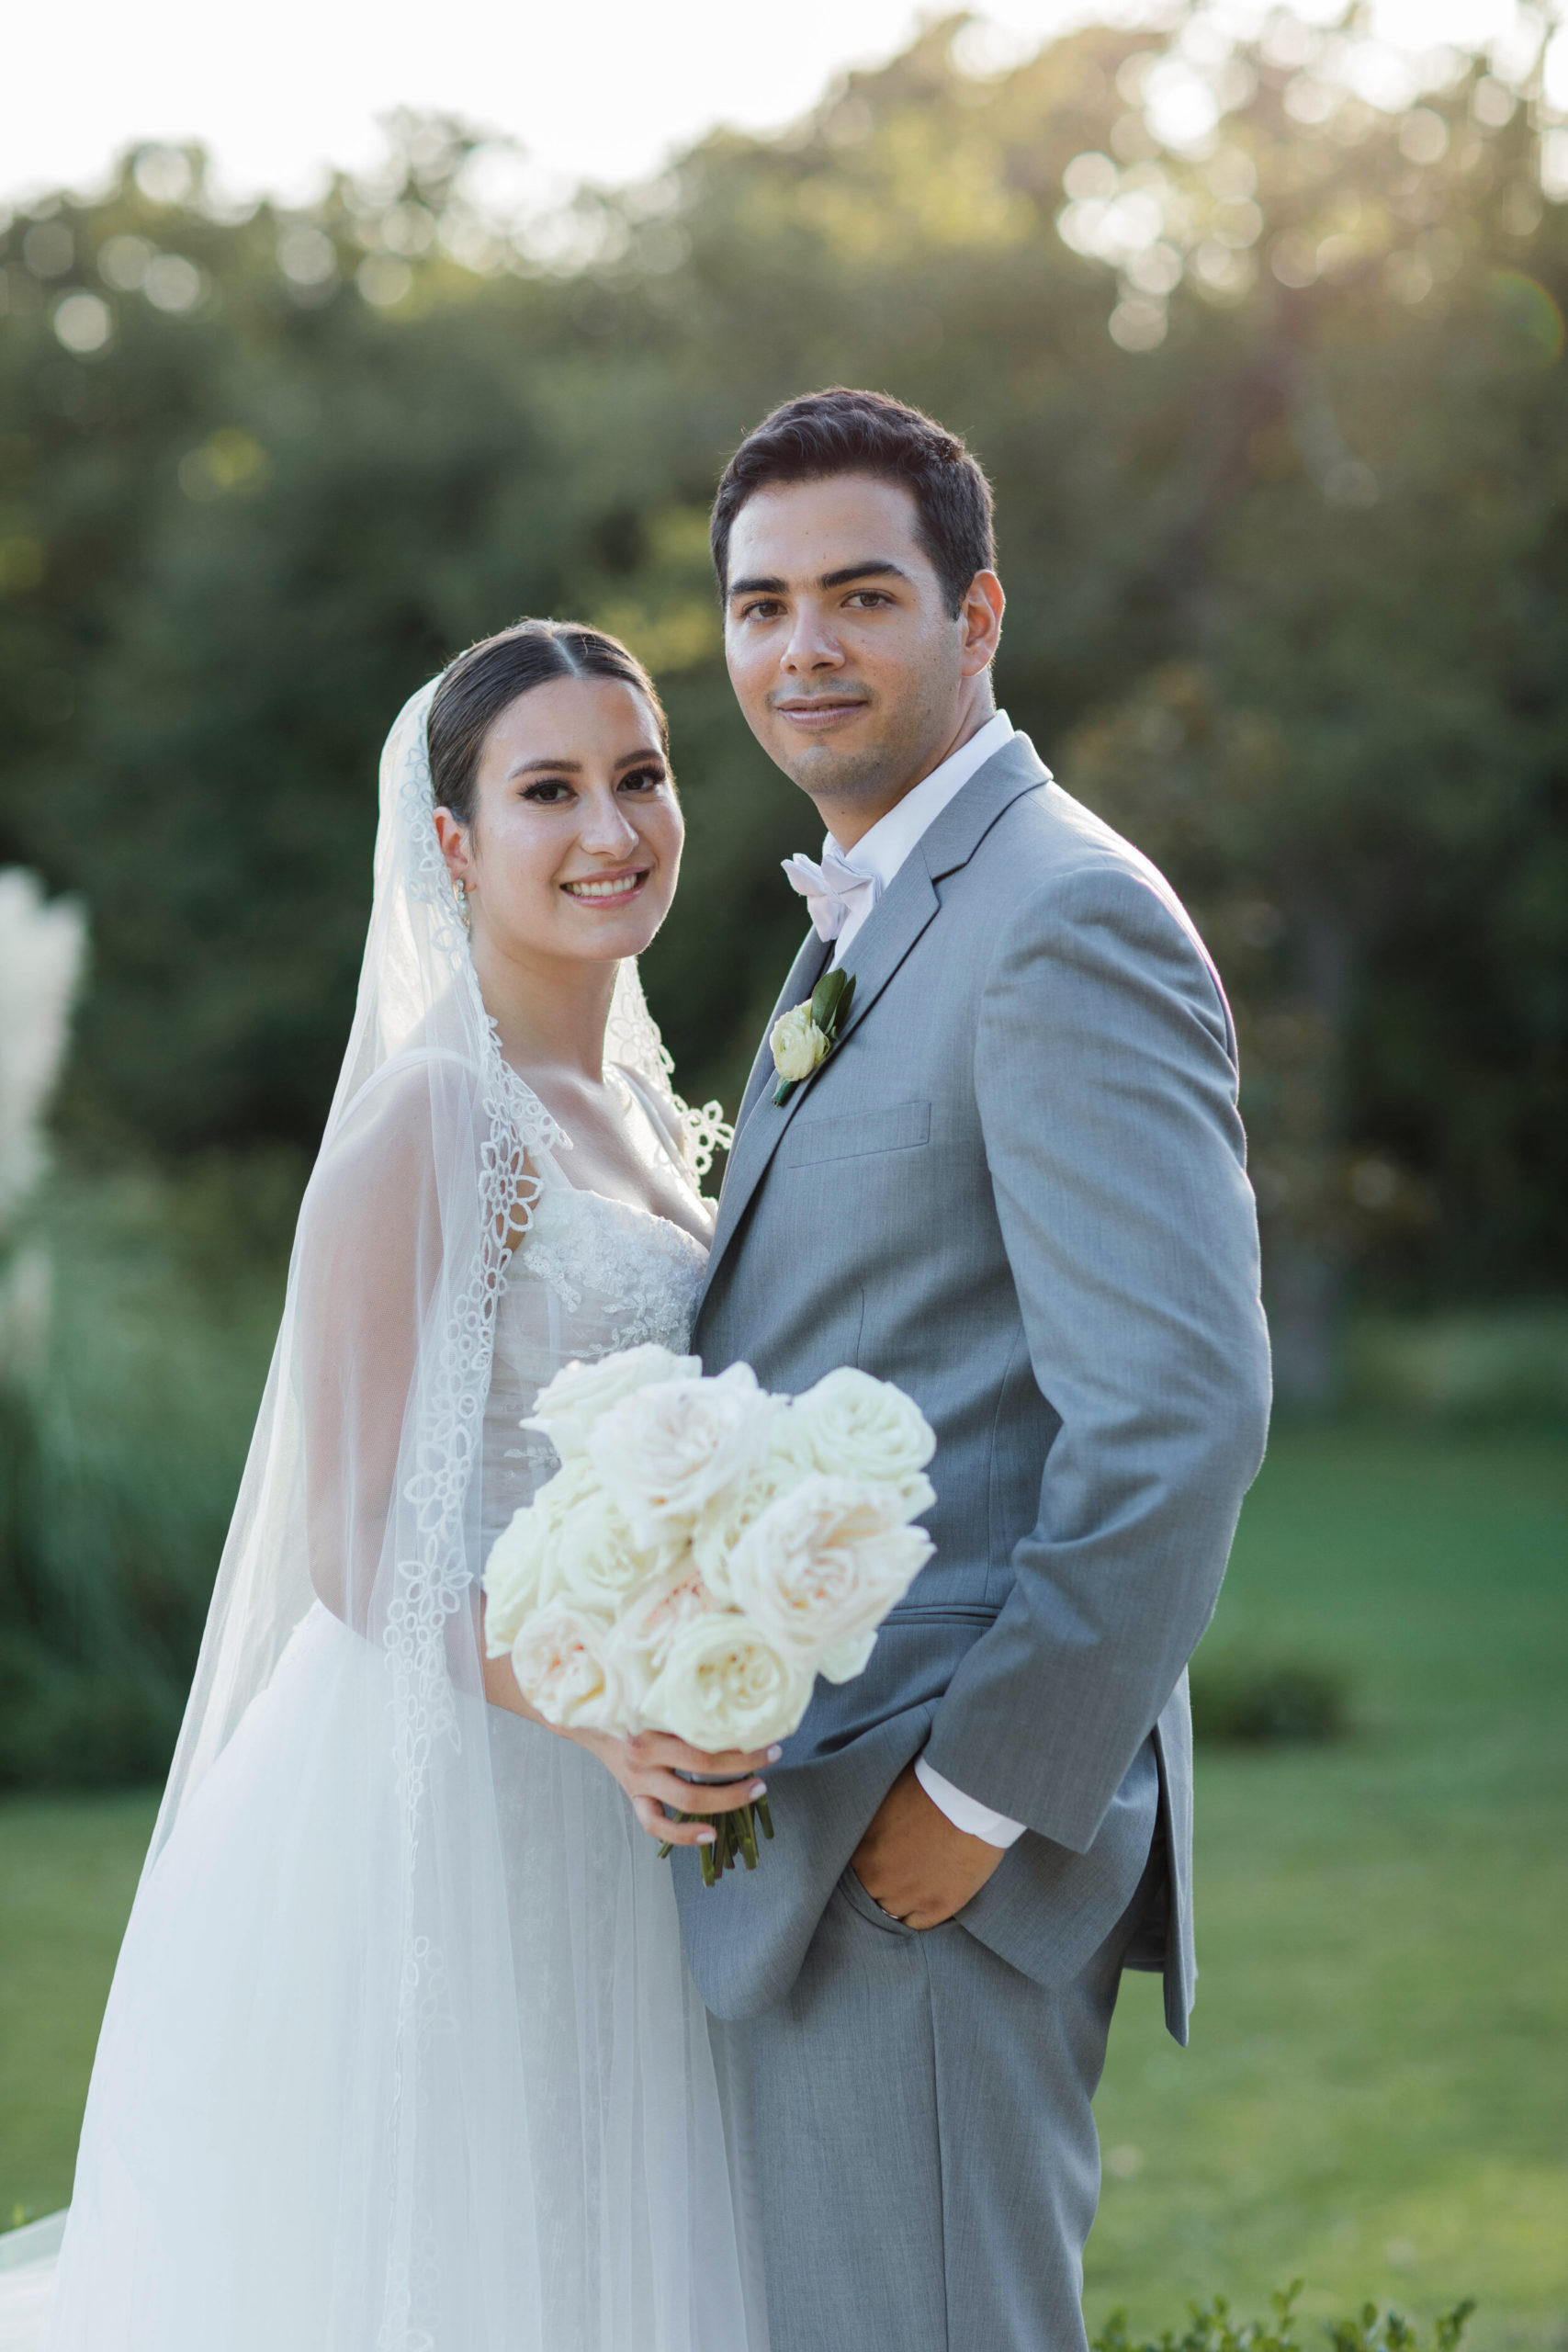 Maria + Jorge at The Springs Event Venue in Denton, Tx